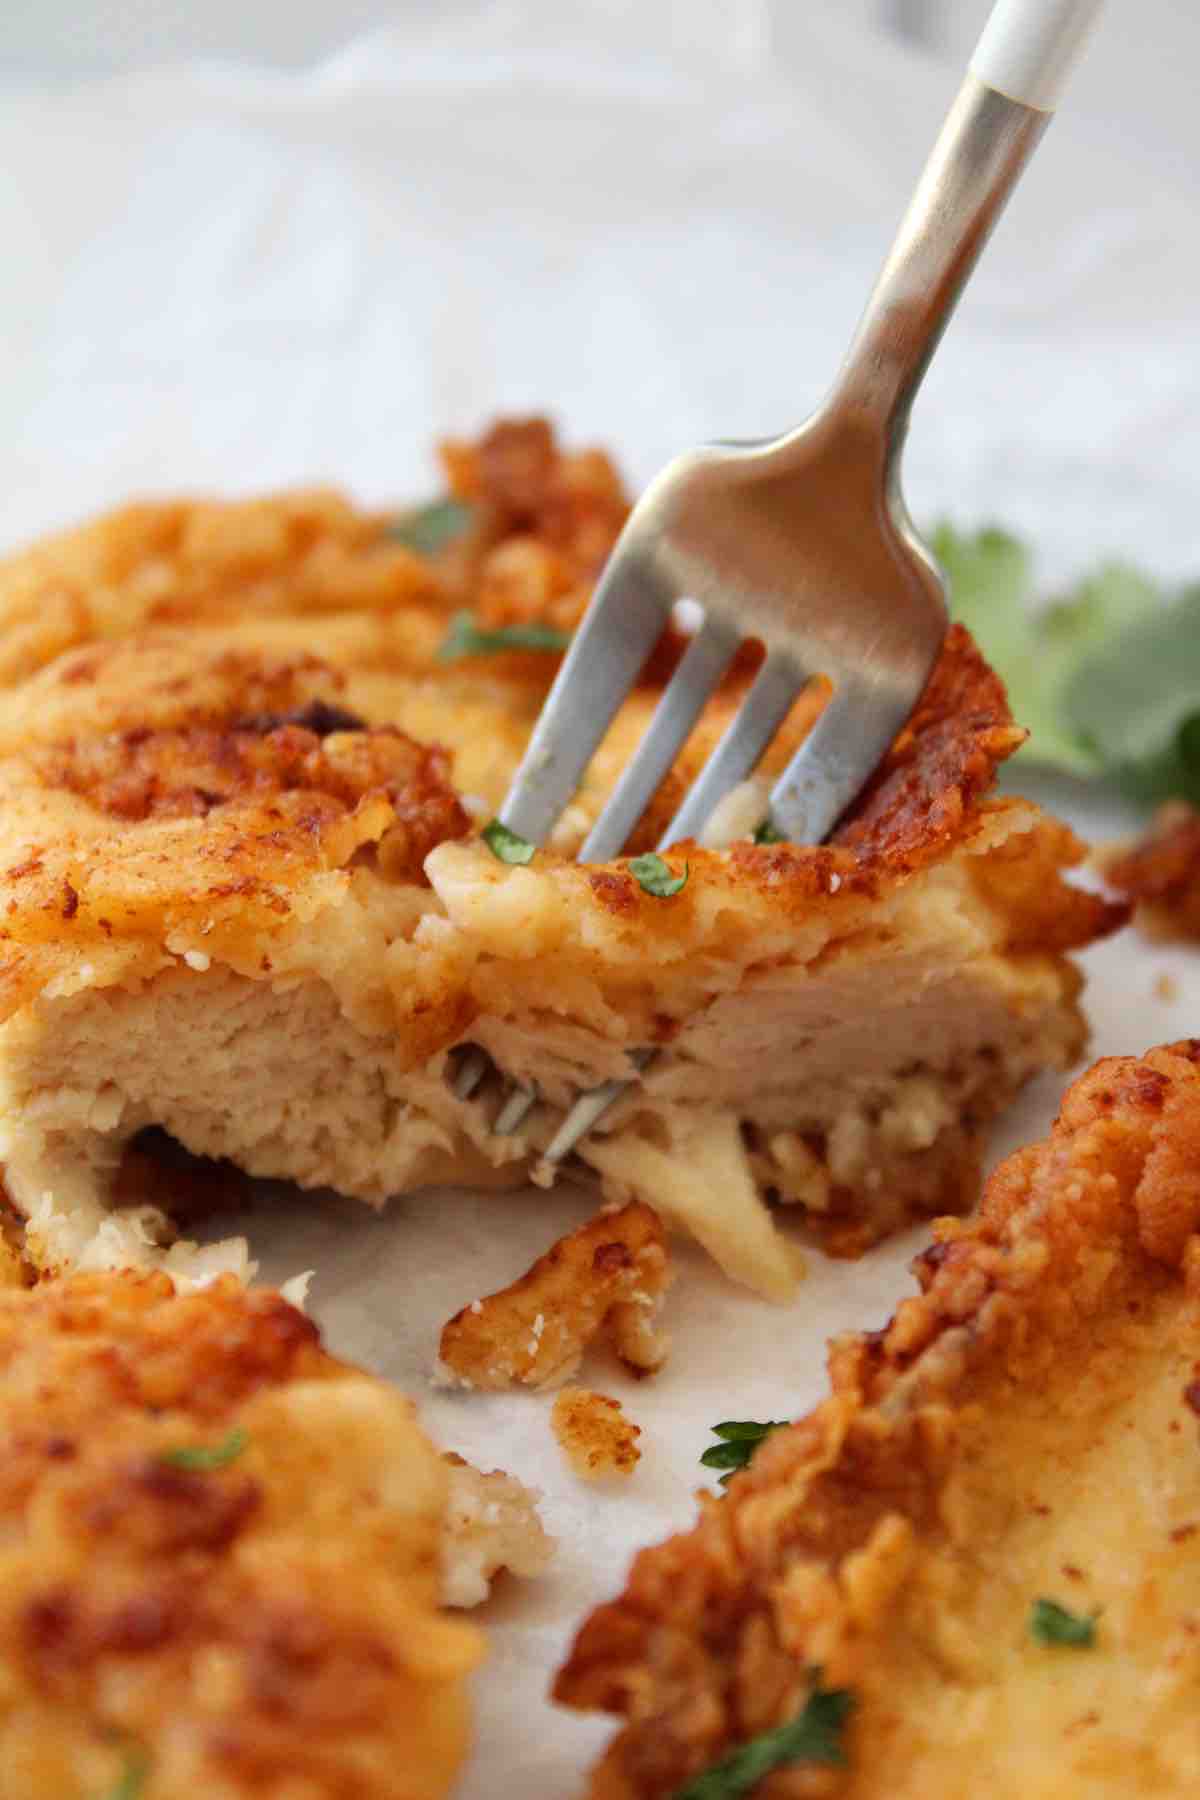 Deep fried chicken breast is cooked until golden and crispy.